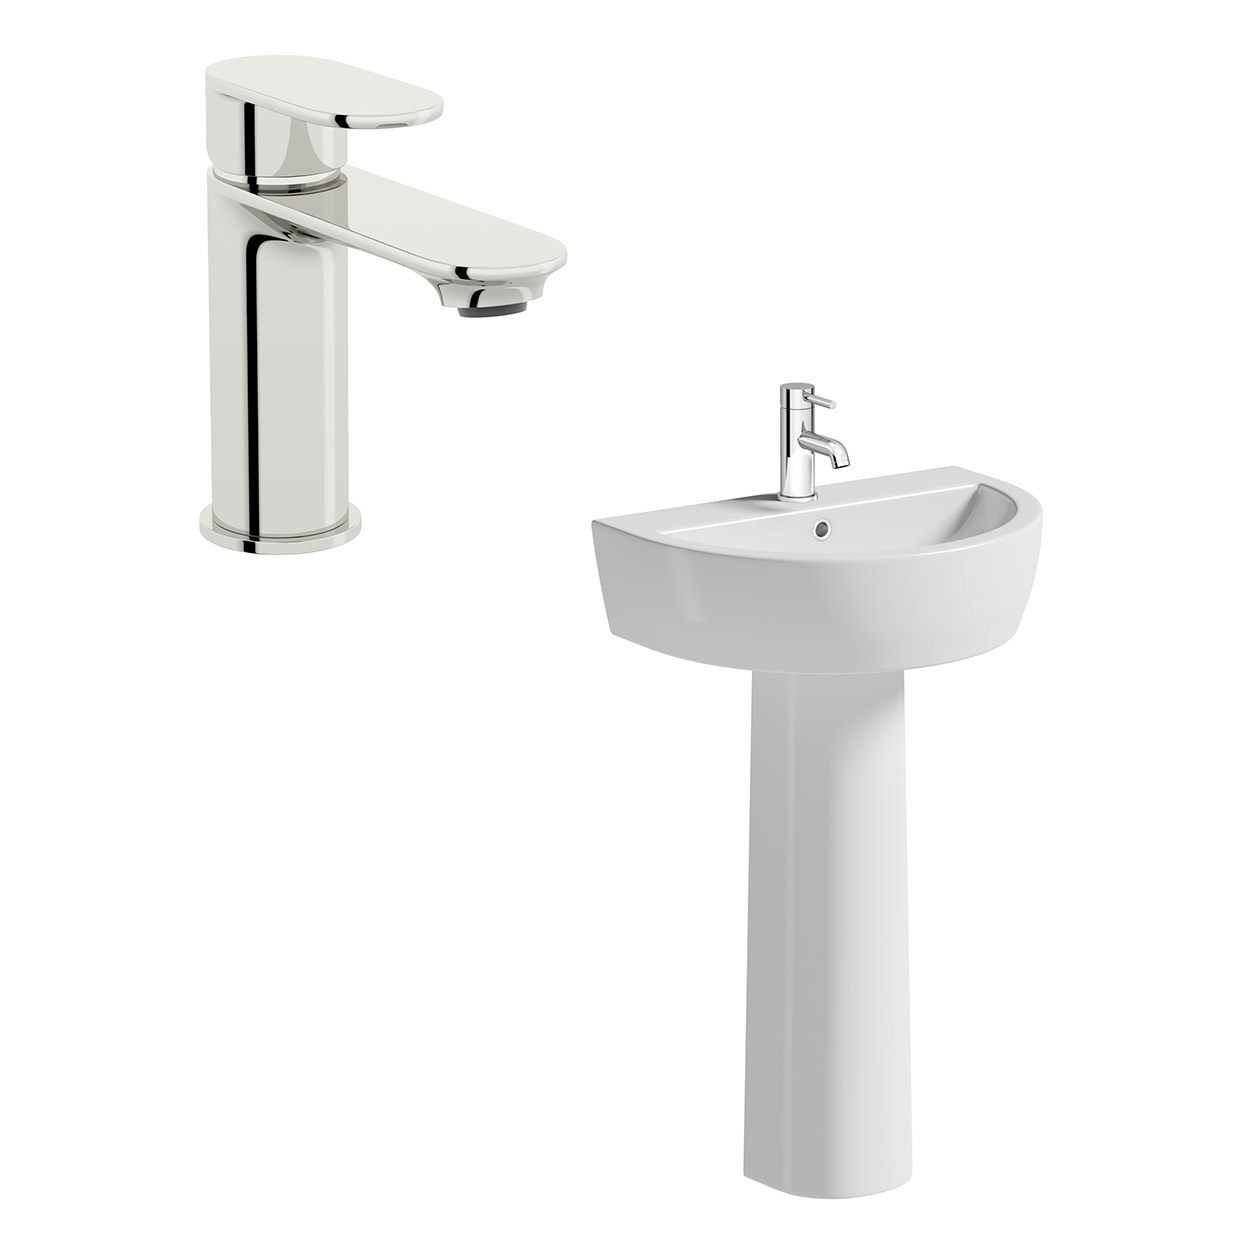 Mode Tate 1 tap hole full pedestal basin 550mm with tap